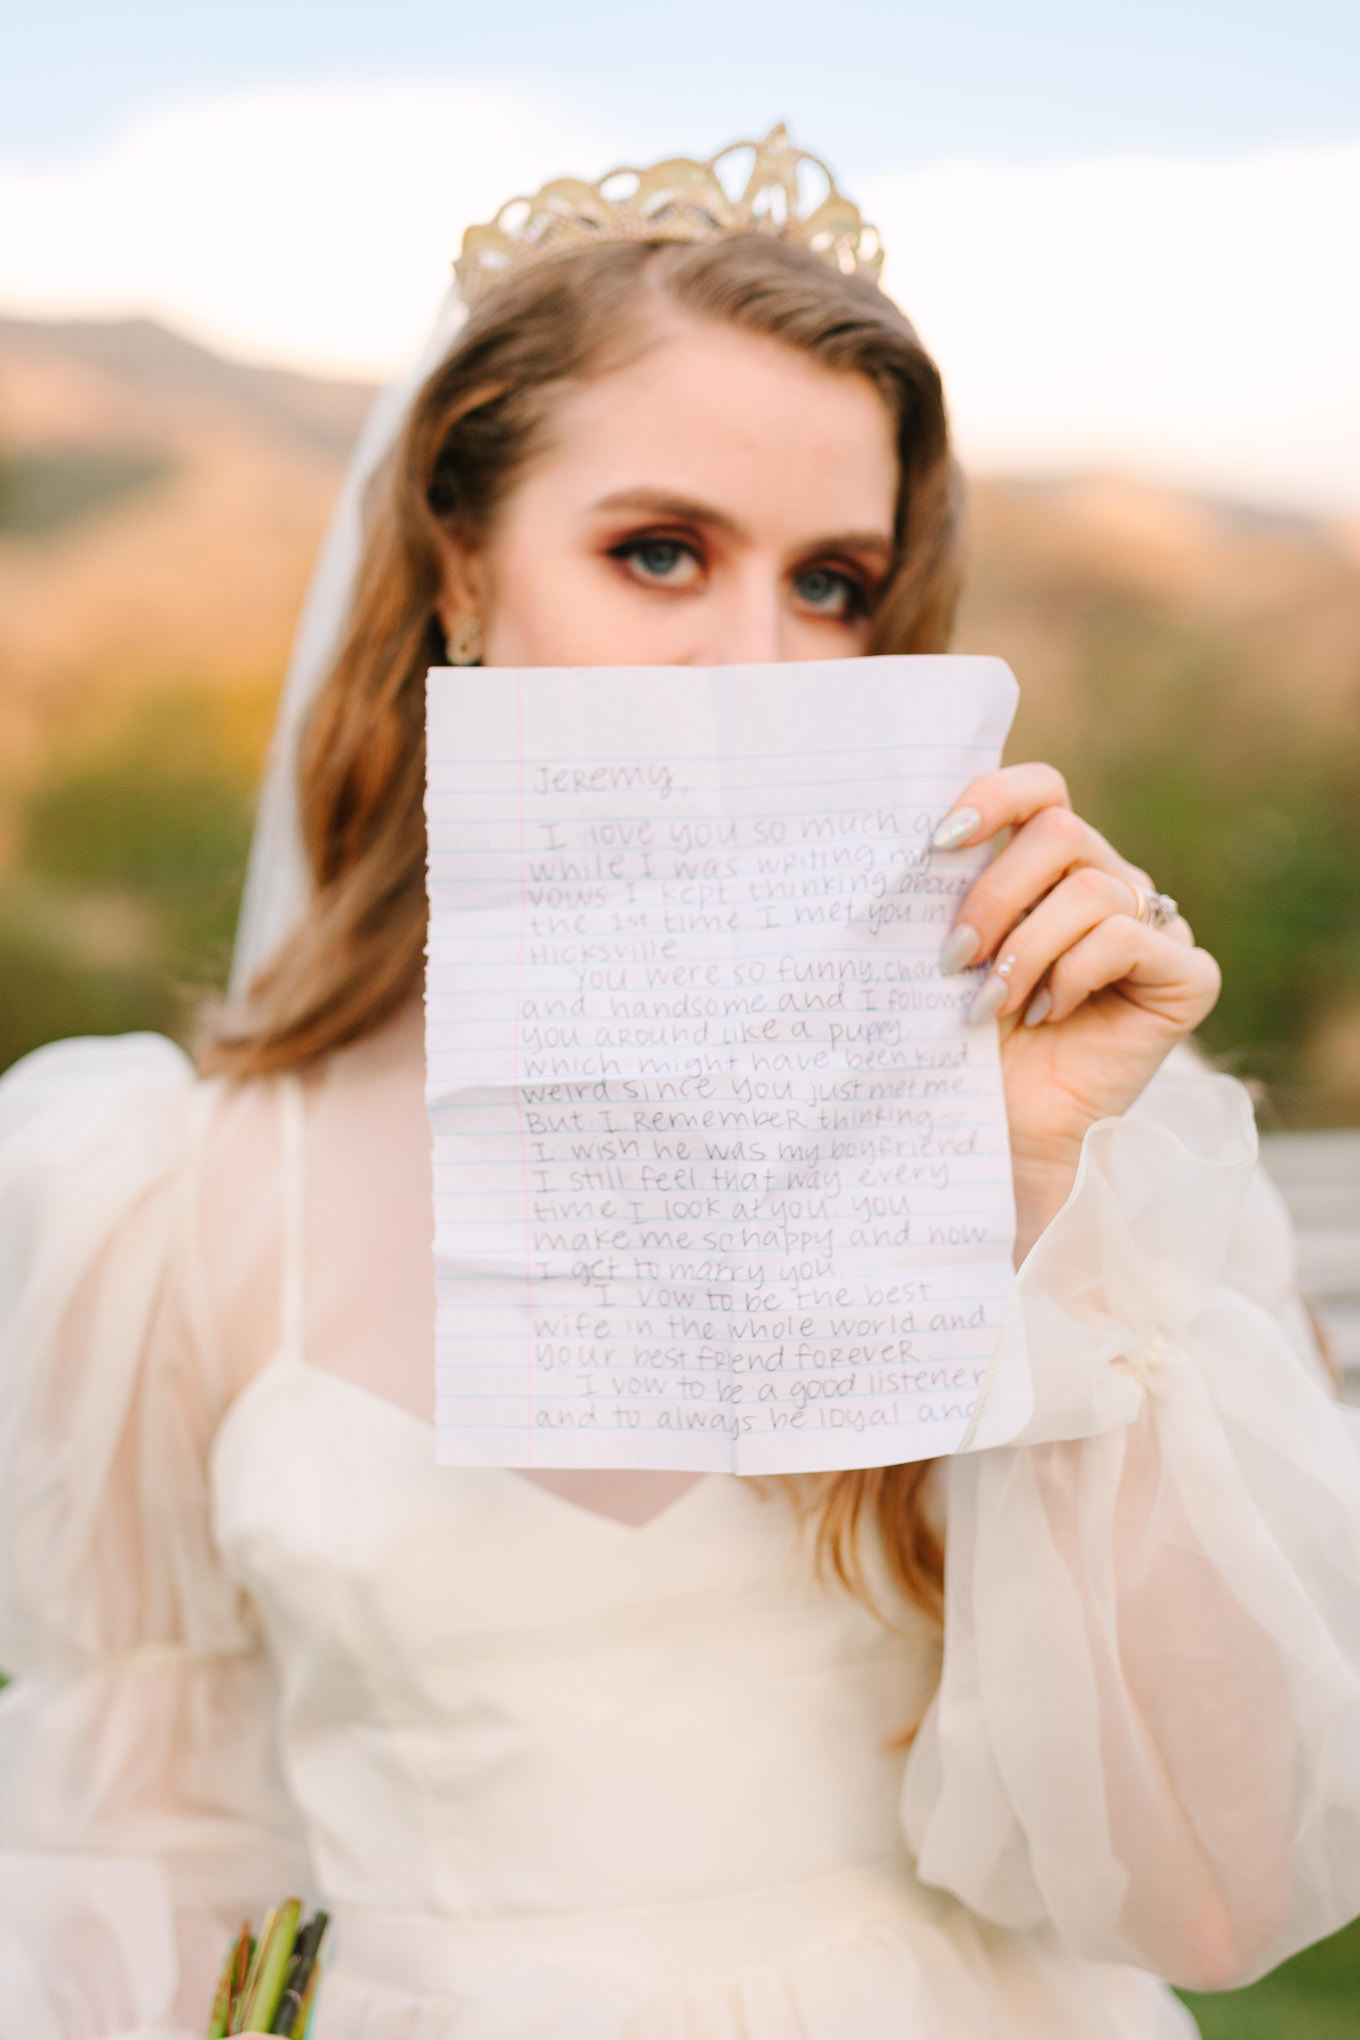 Bride holding wedding vows | Colorful and quirky wedding at Higuera Ranch in San Luis Obispo | #sanluisobispowedding #californiawedding #higueraranch #madonnainn   
Source: Mary Costa Photography | Los Angeles